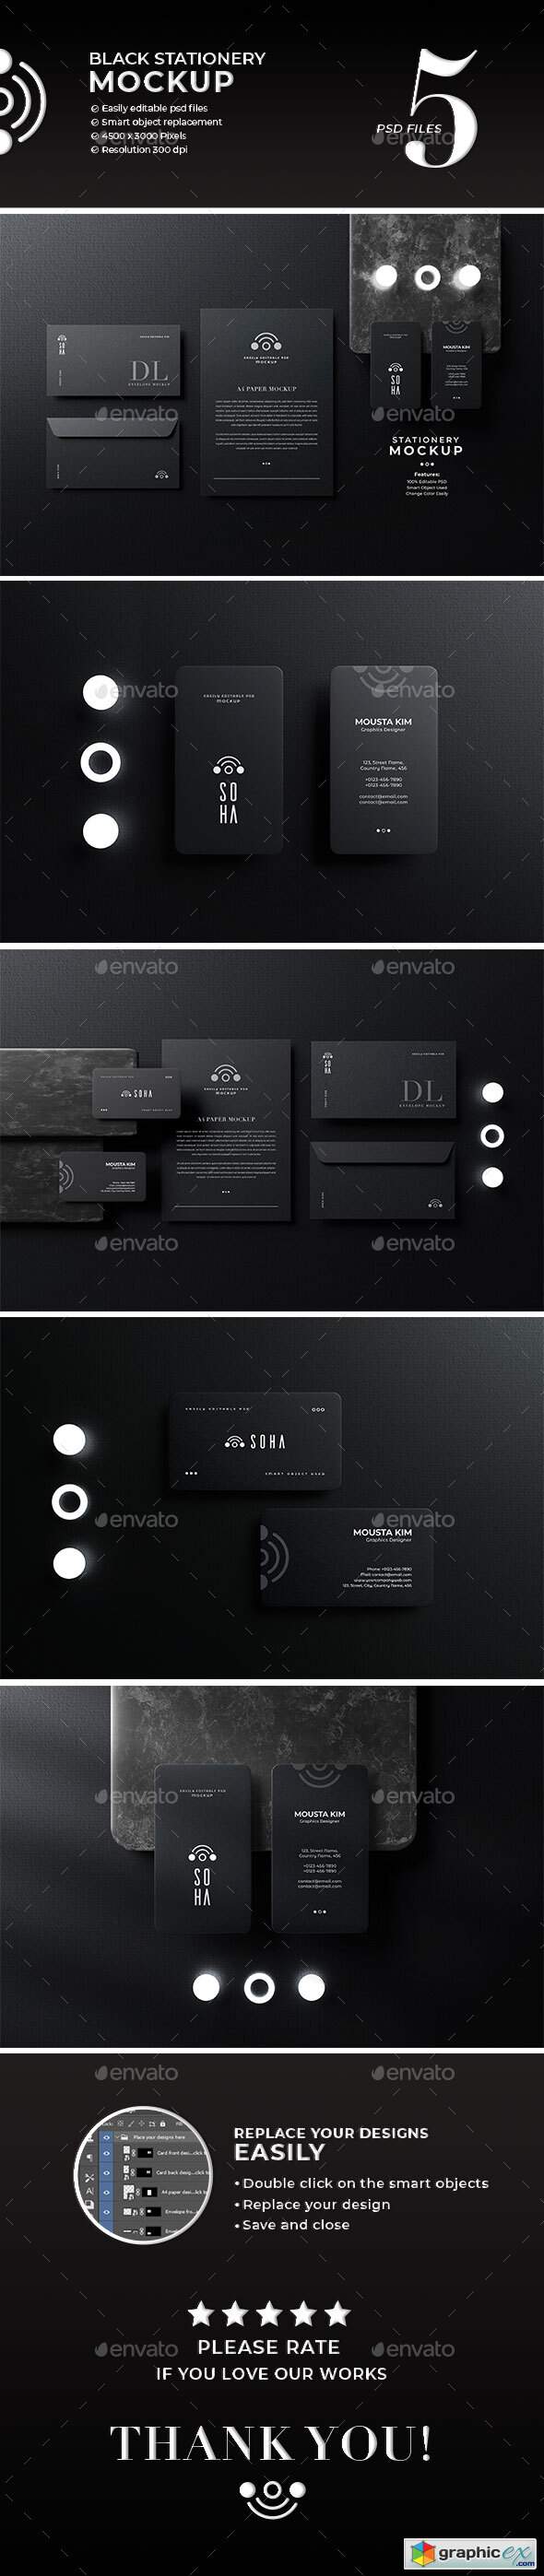 Download Black Stationery Mockup » Free Download Vector Stock Image Photoshop Icon